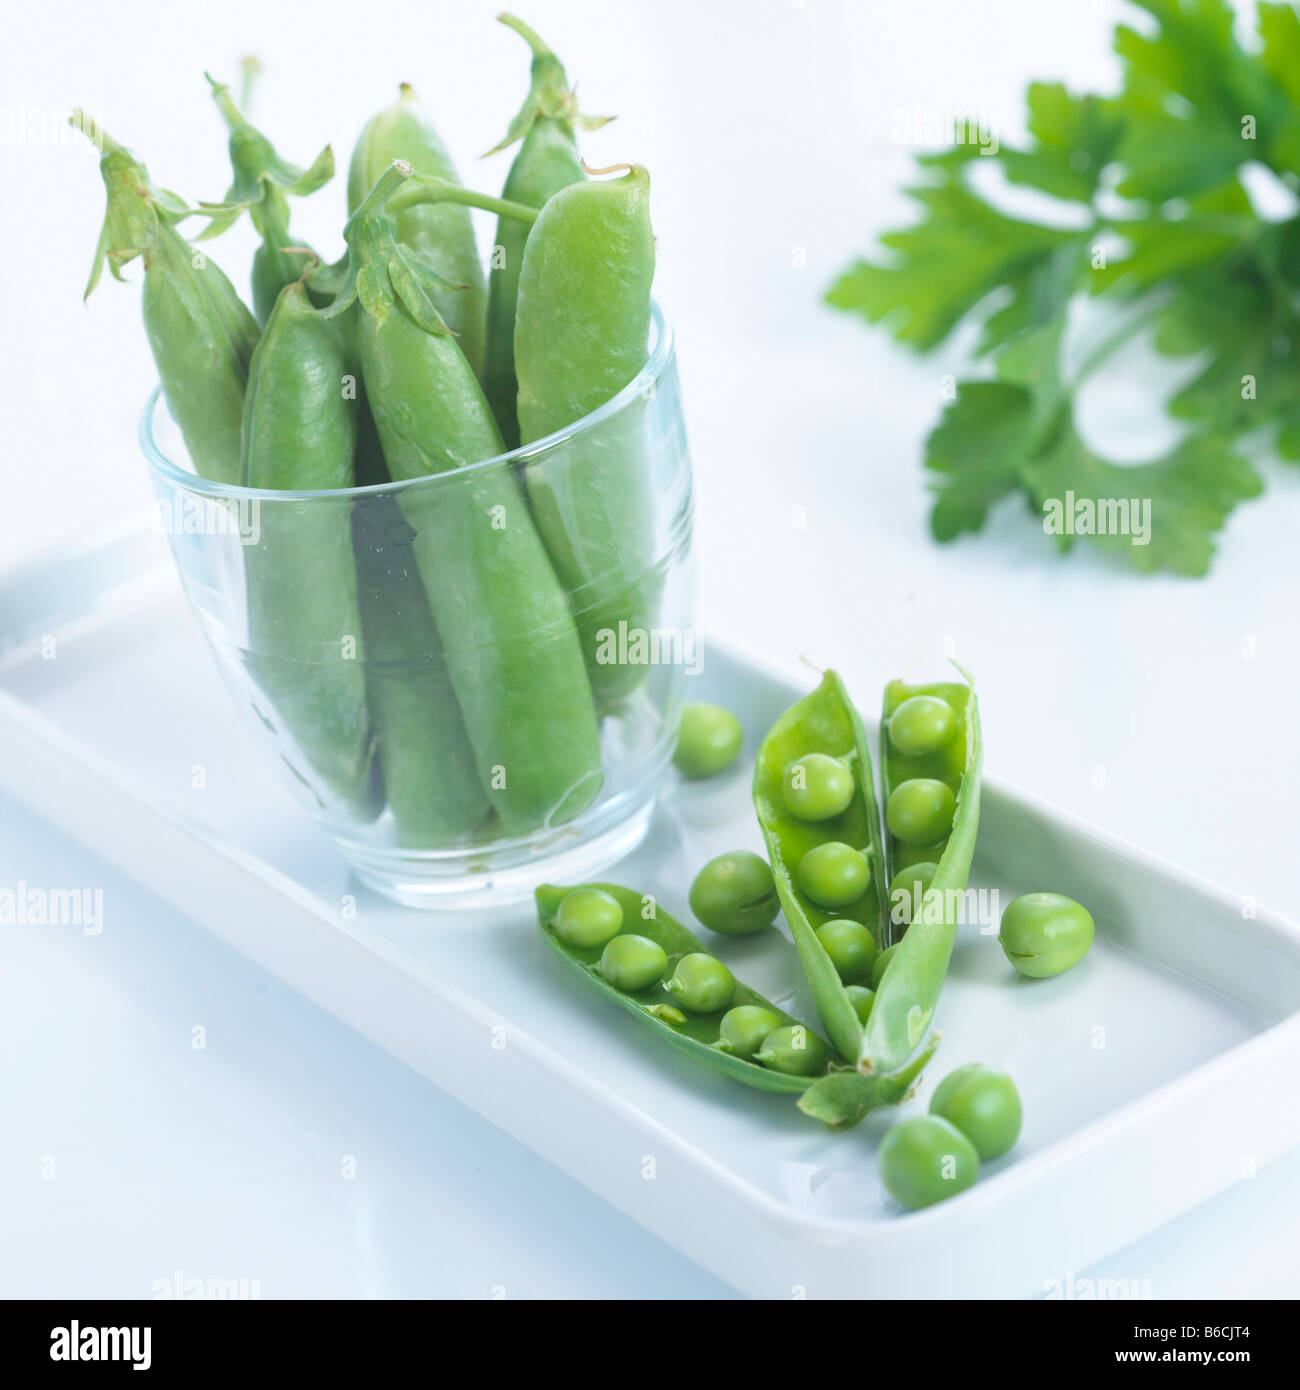 Close-up of pea pods and peas on tray Stock Photo